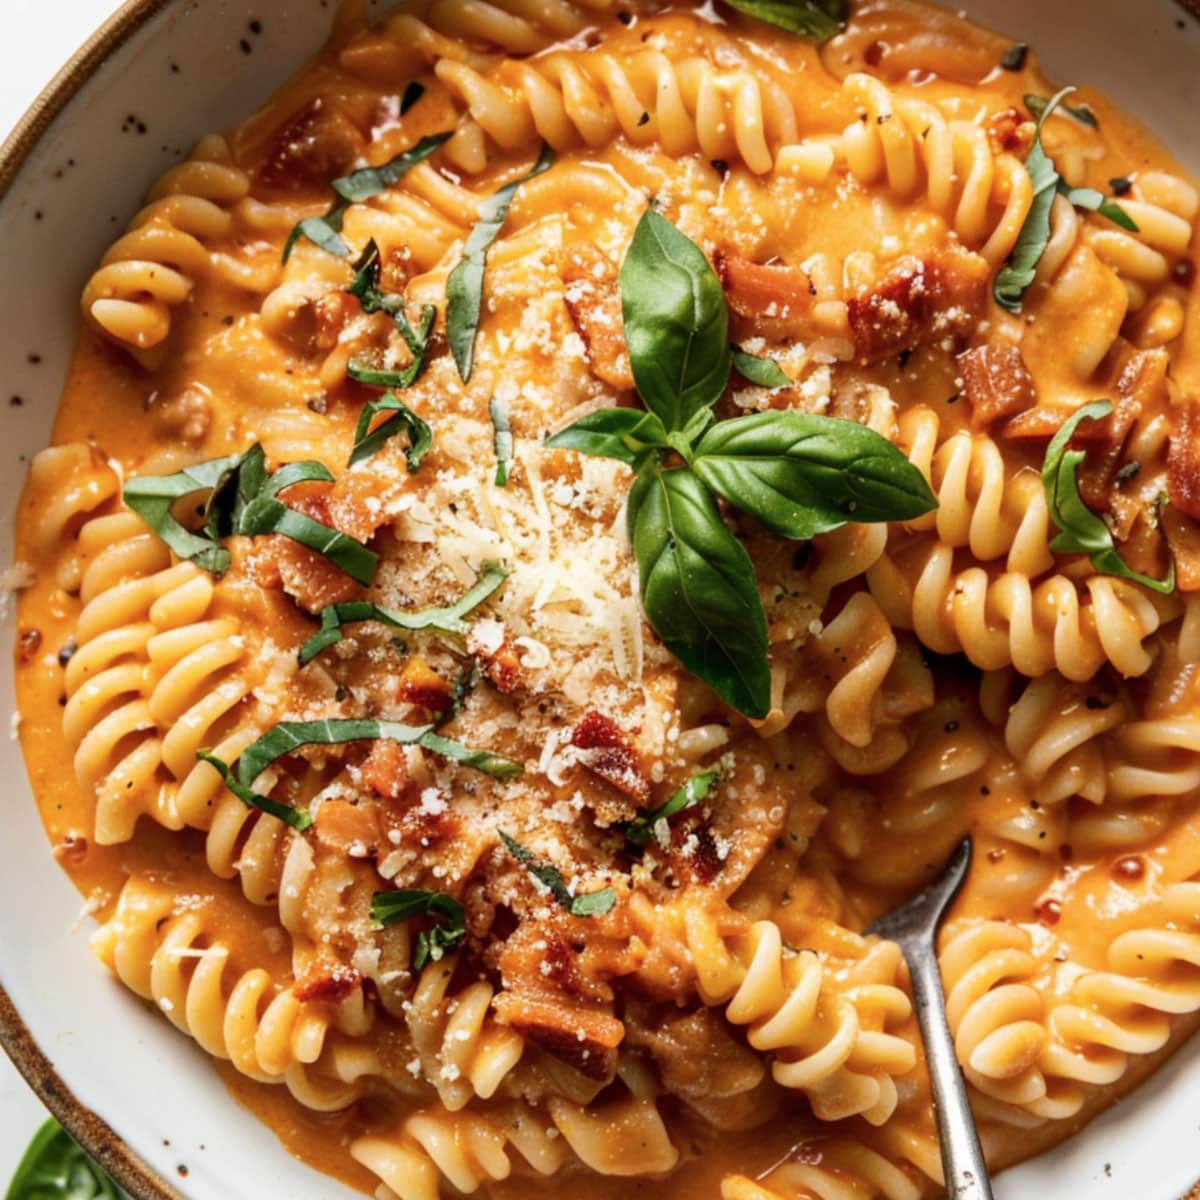 Creamy, rich vodka sauce with a sprinkle of parmesan cheese and a swirl of olive oil, showcasing its velvety texture.